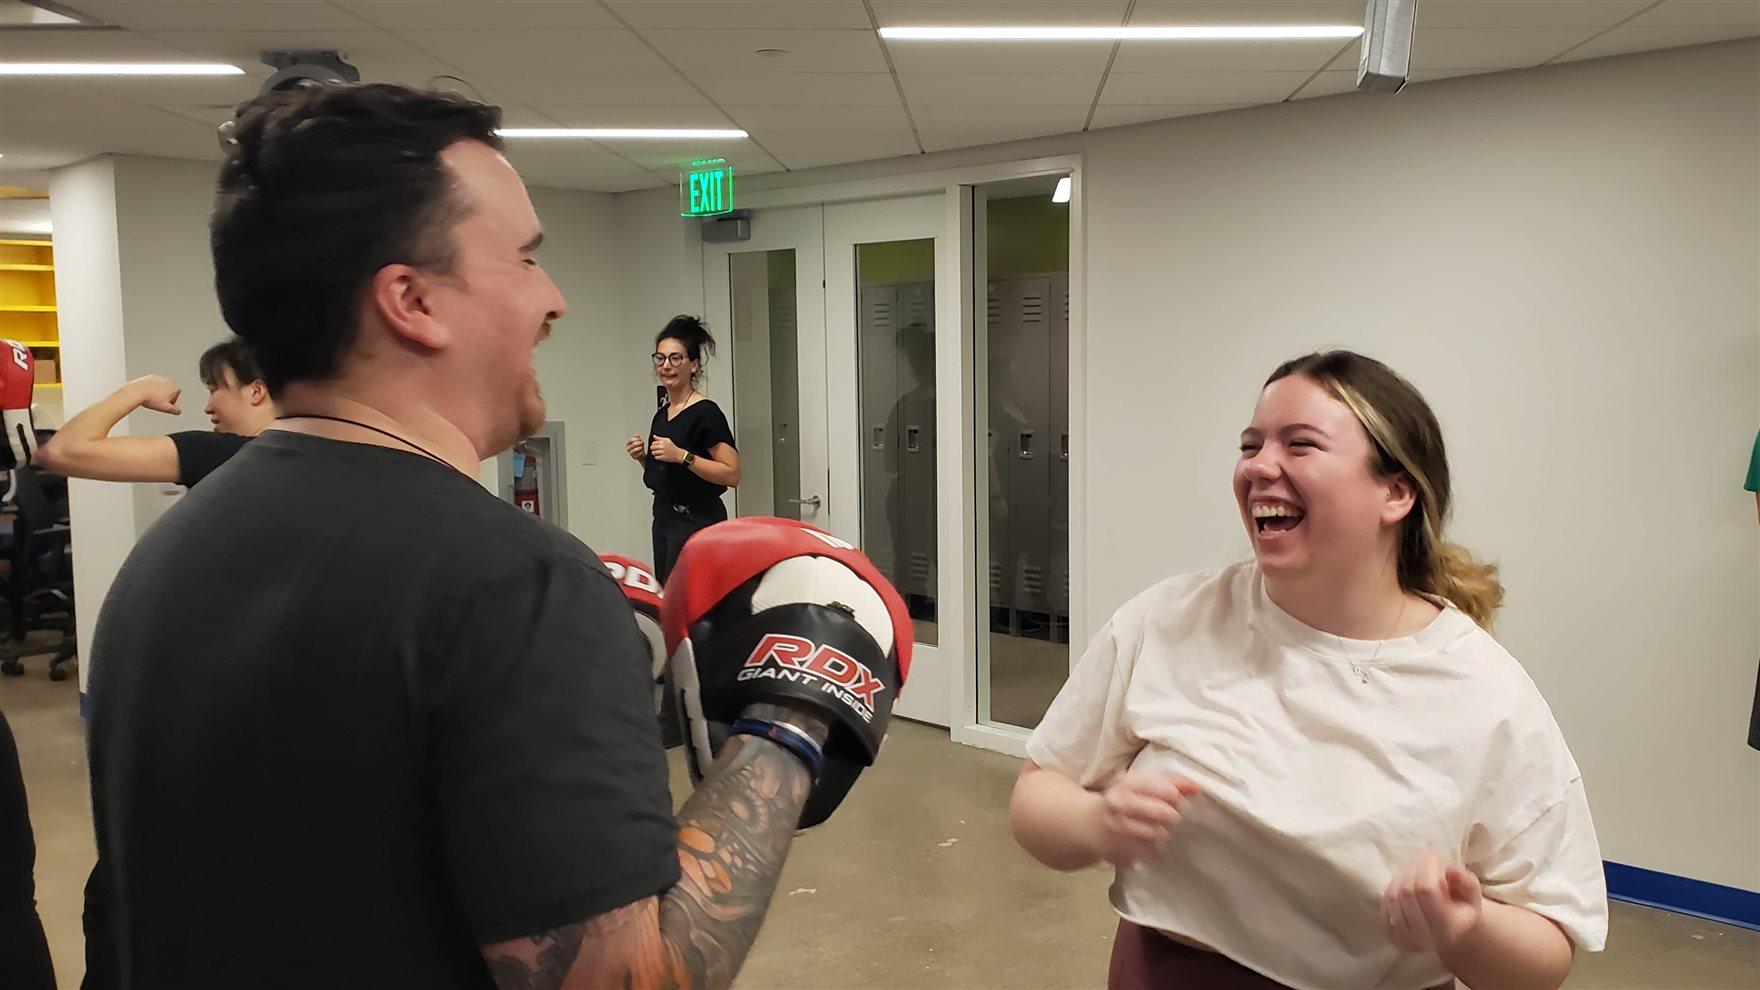  man in a black tee shirt with boxing gloves stands before a smiling female student in a white shirt who is laughing. as students look on.